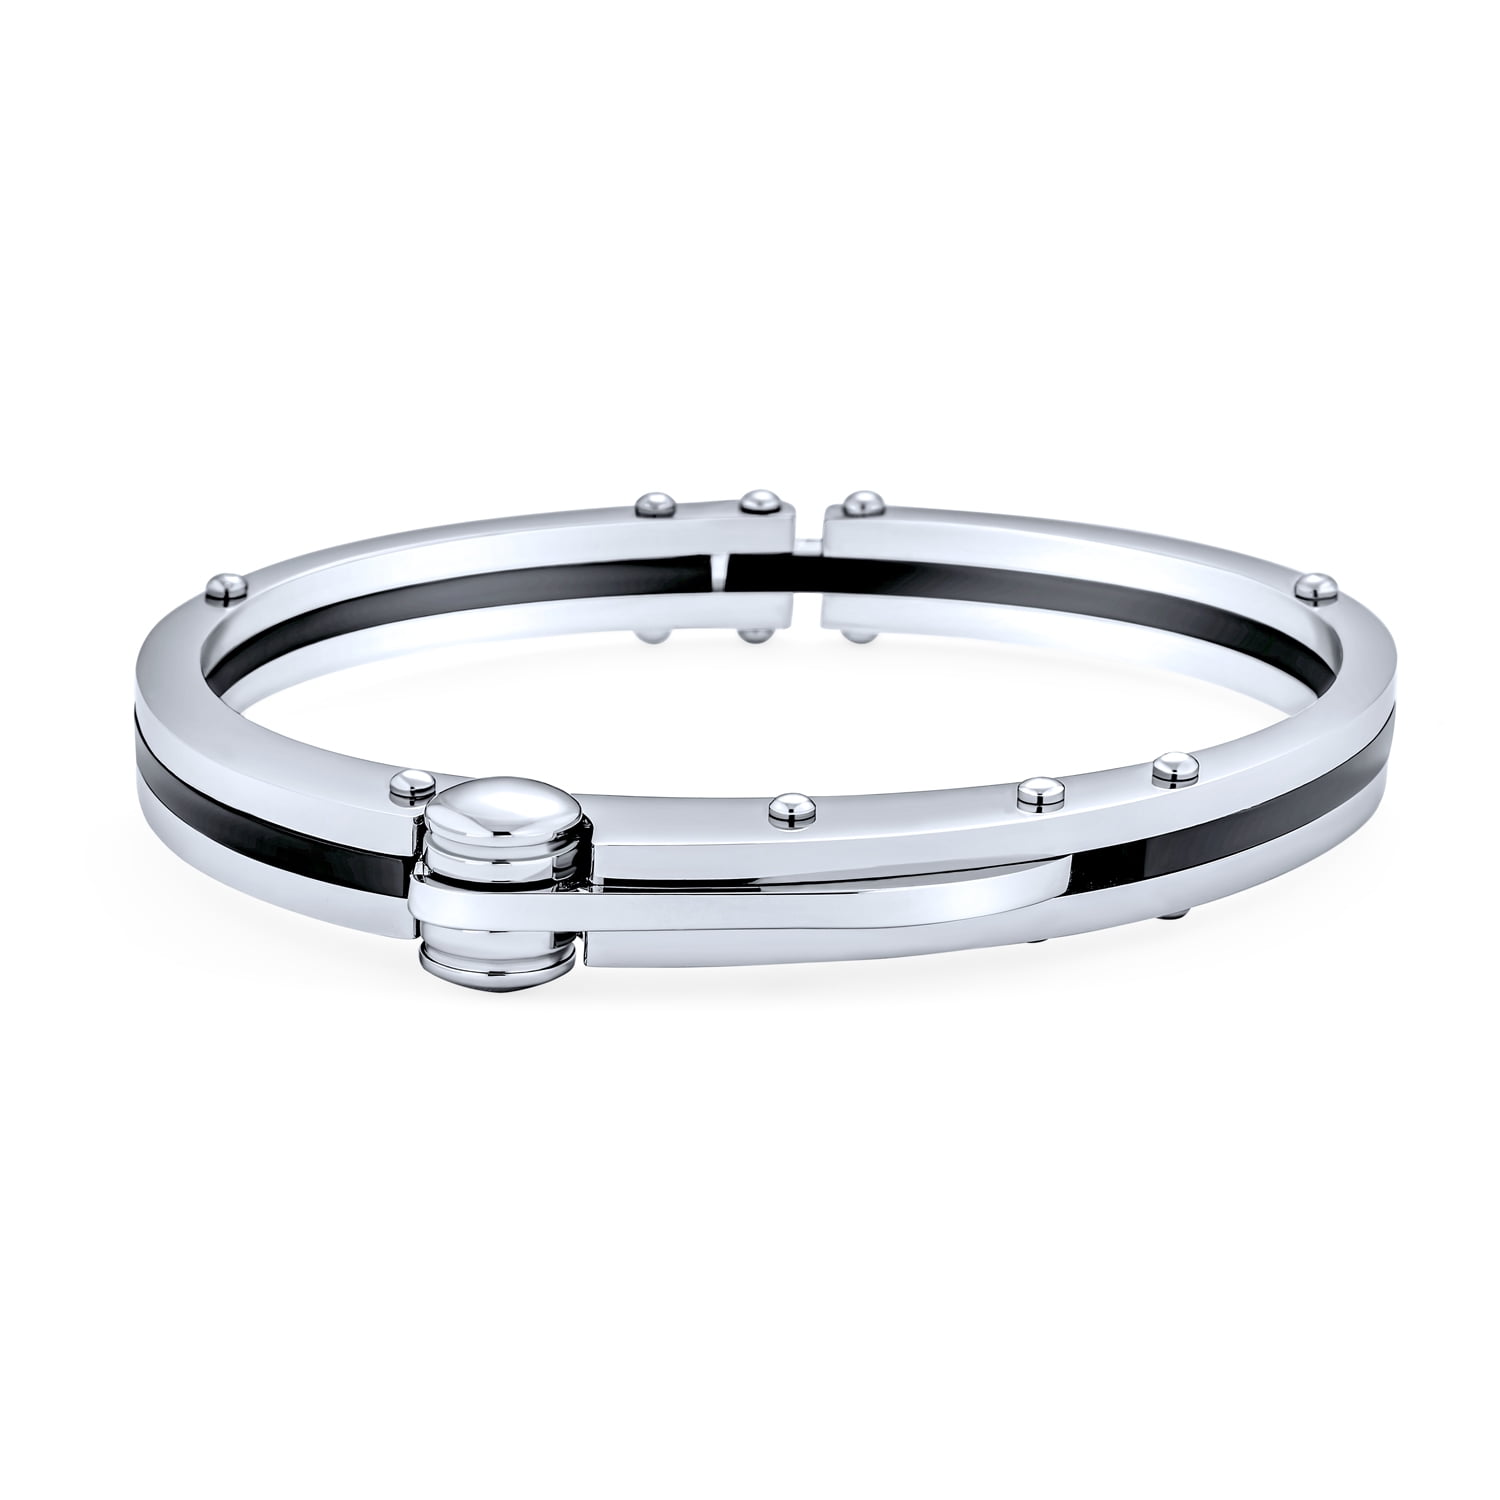 Mens Stainless Steel Bracelet Link Wrist Handcuffs Polished Silver 